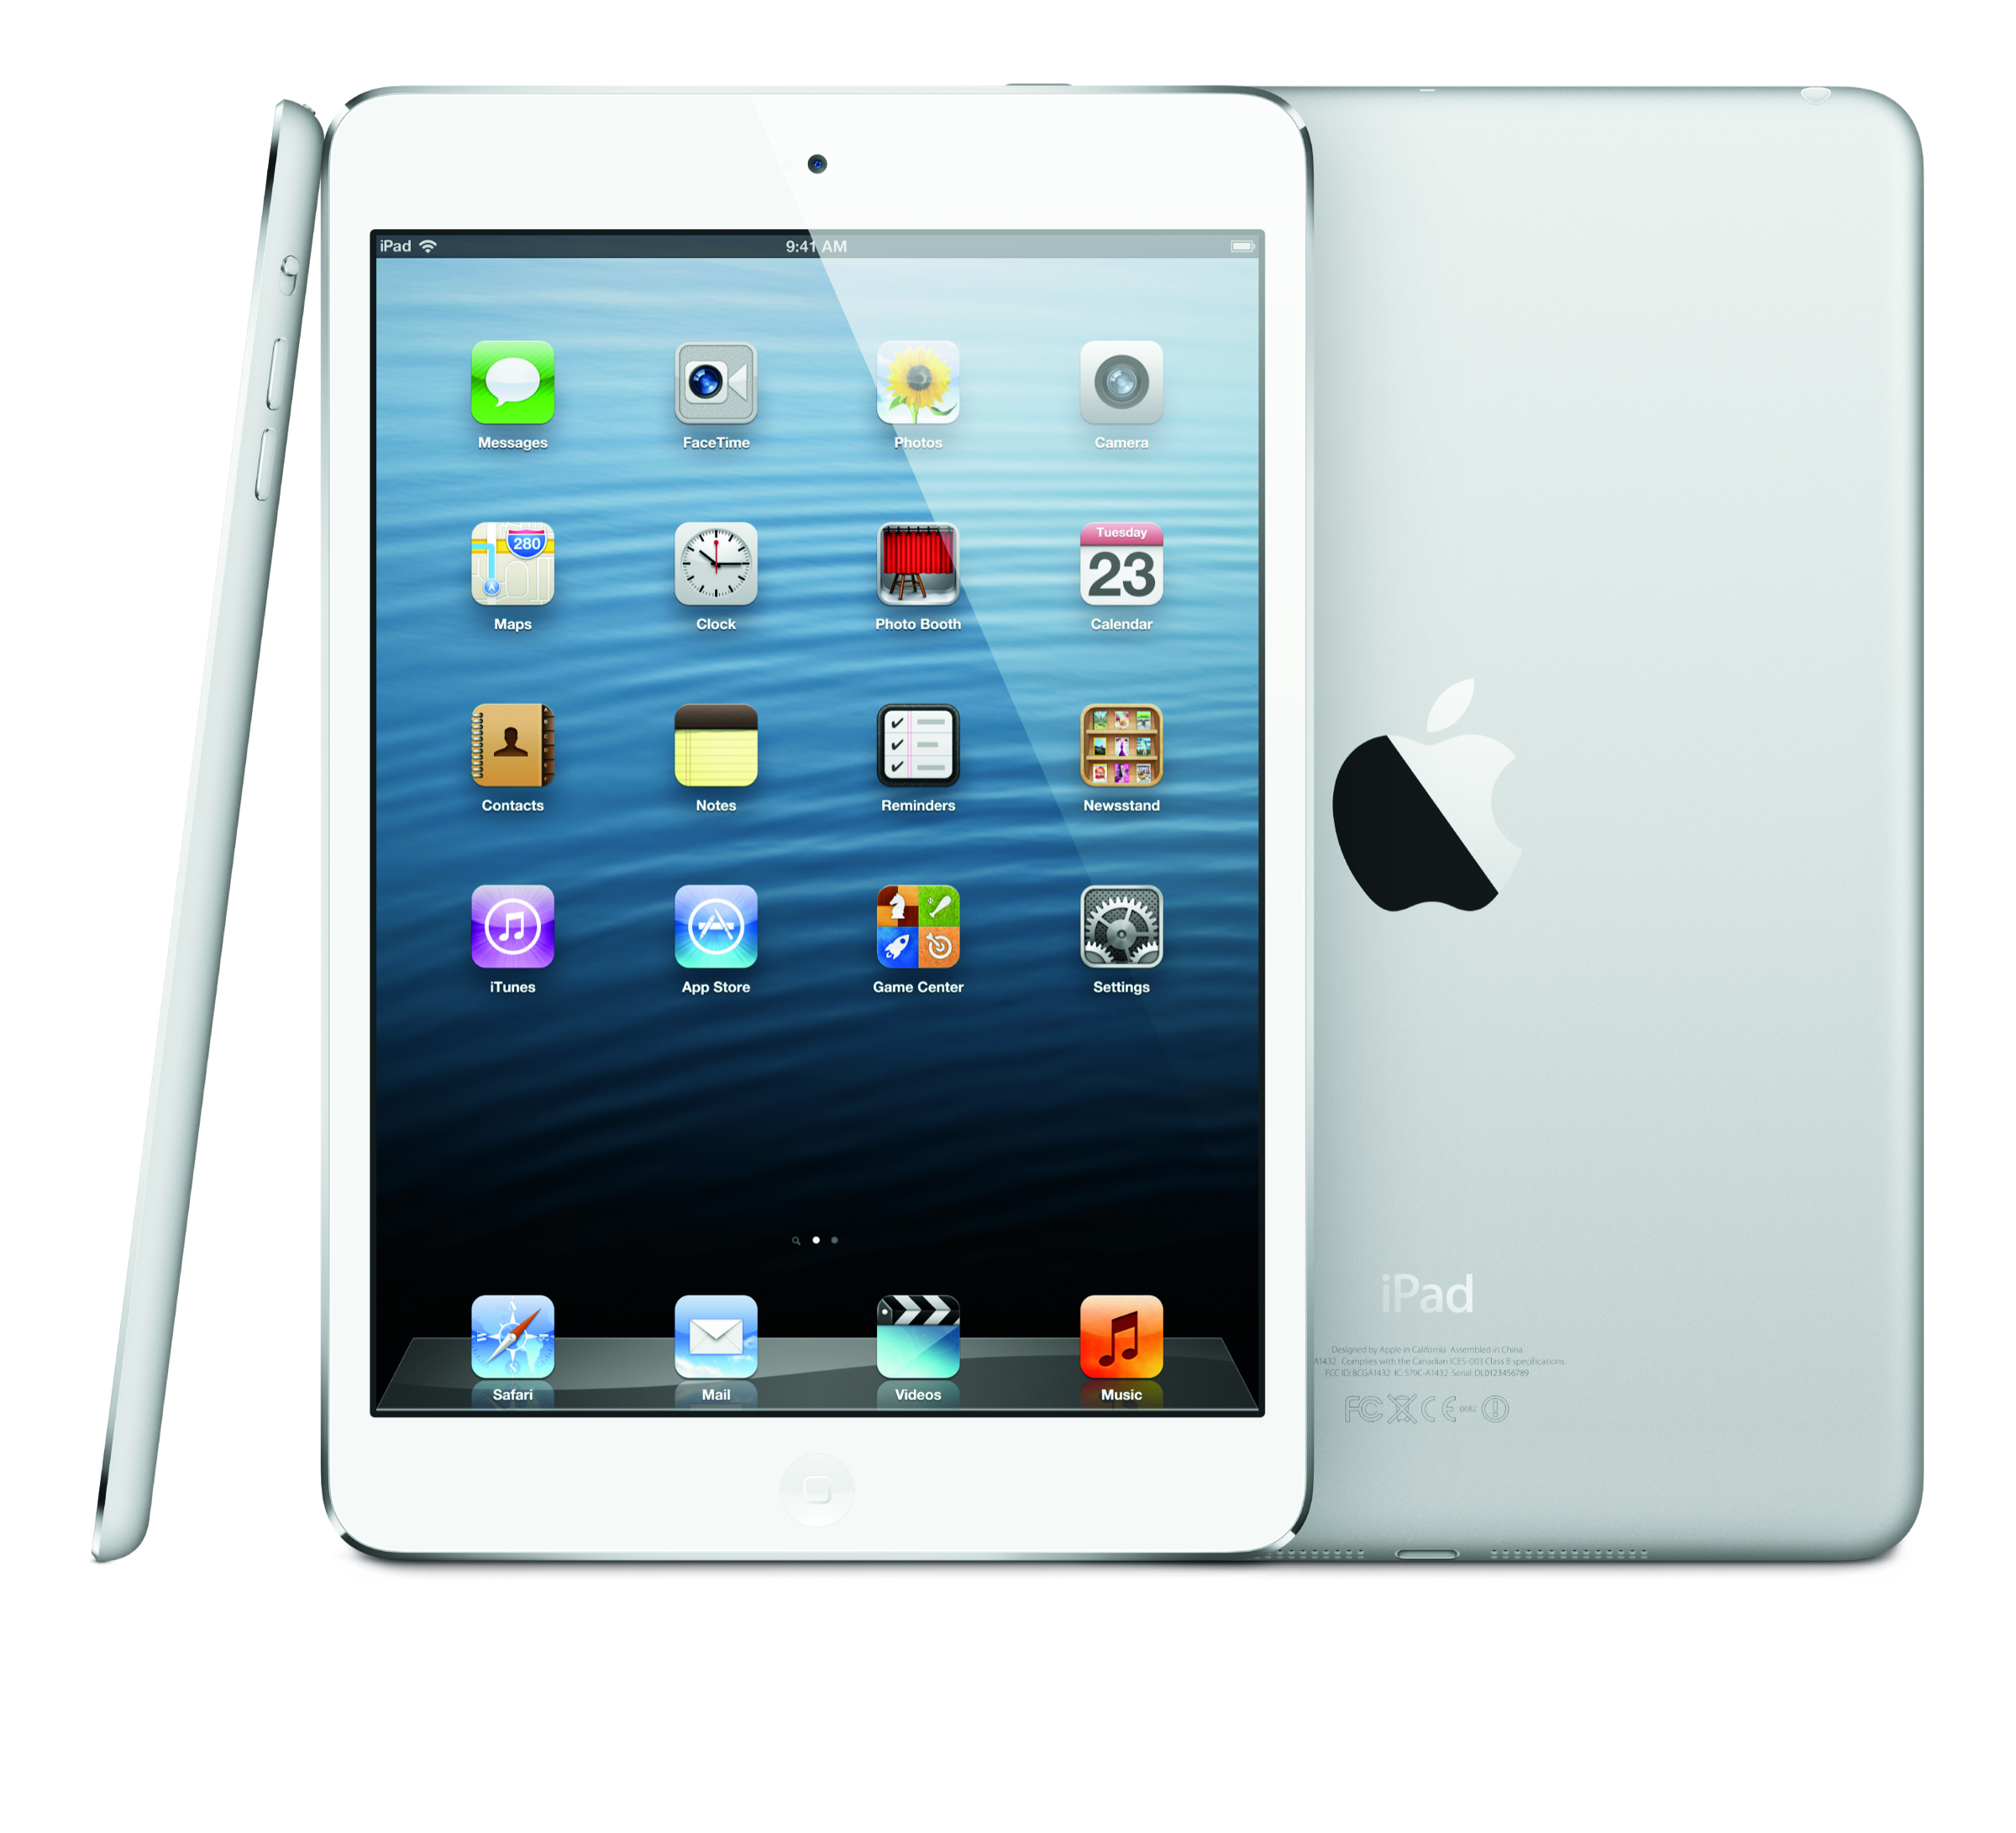 Announcing the Winner of the IPAD MINI Drawing (Pittcon 2014)